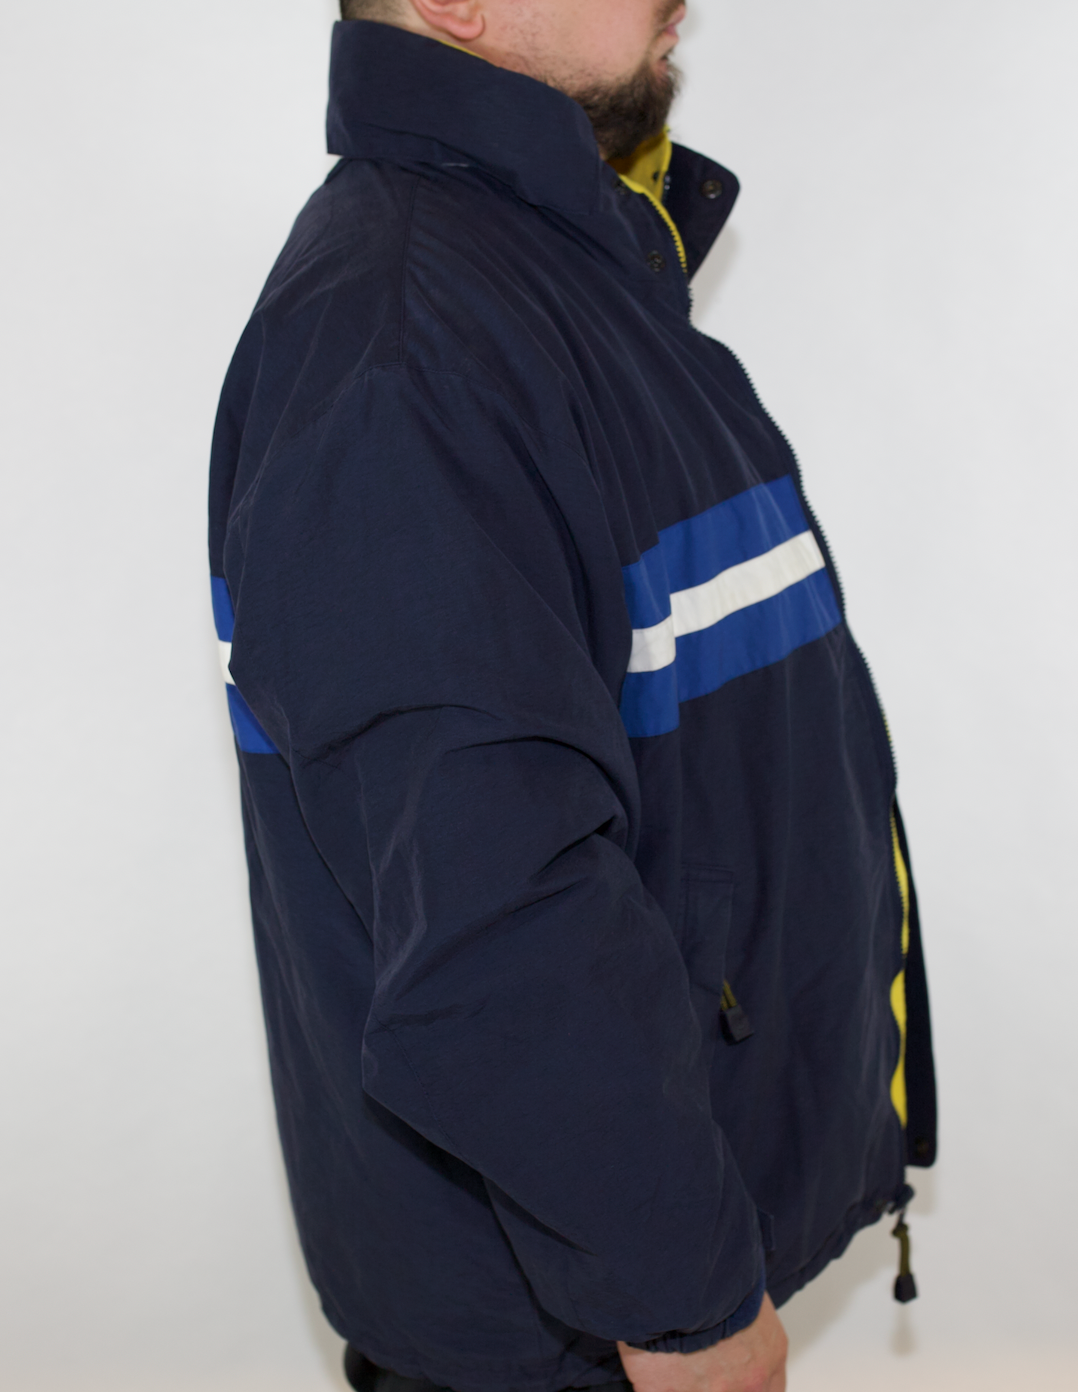 VINTAGE NAUTICA COMPETITION REVERSIBLE NAVY/YELLOW JACKET (XL)